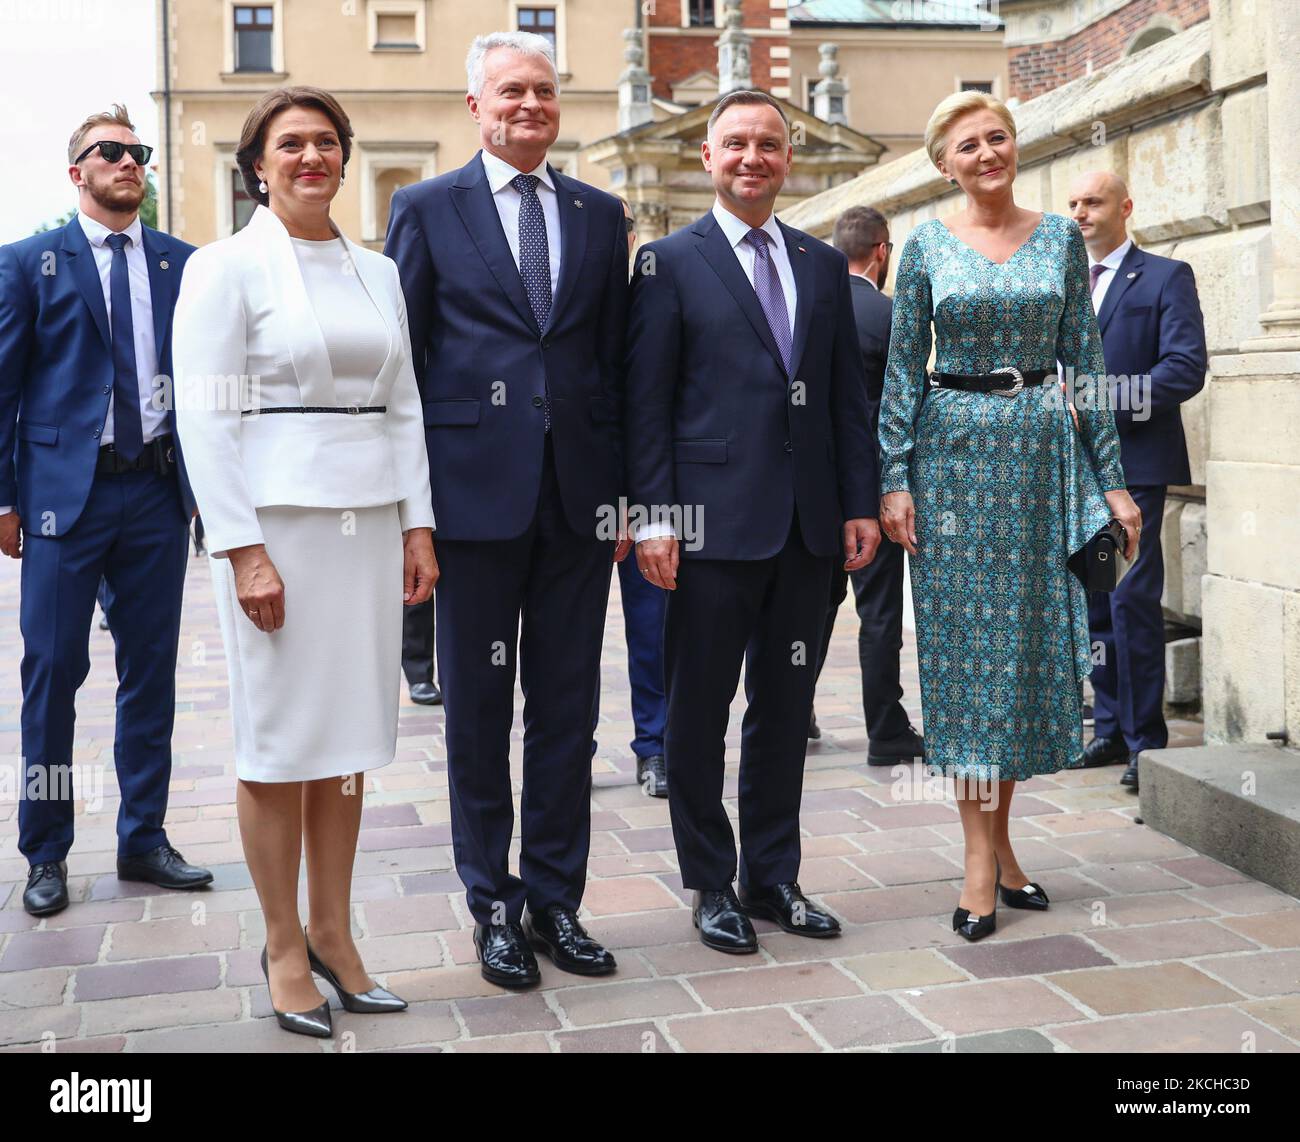 Lithuanian President Gitanas Nauseda and First Lady Diana Nausediene are welcomed by Poland’s presidential couple Andrzej Duda and Agata Korhauser-Duda by the Wawel Cathedral in Krakow, Poland on July 11, 2021. Presidents met to discuss Poland’s help in protecting Lithuania’s borders from the recent influx of illegal immigrants from Belarus. (Photo by Beata Zawrzel/NurPhoto) Stock Photo